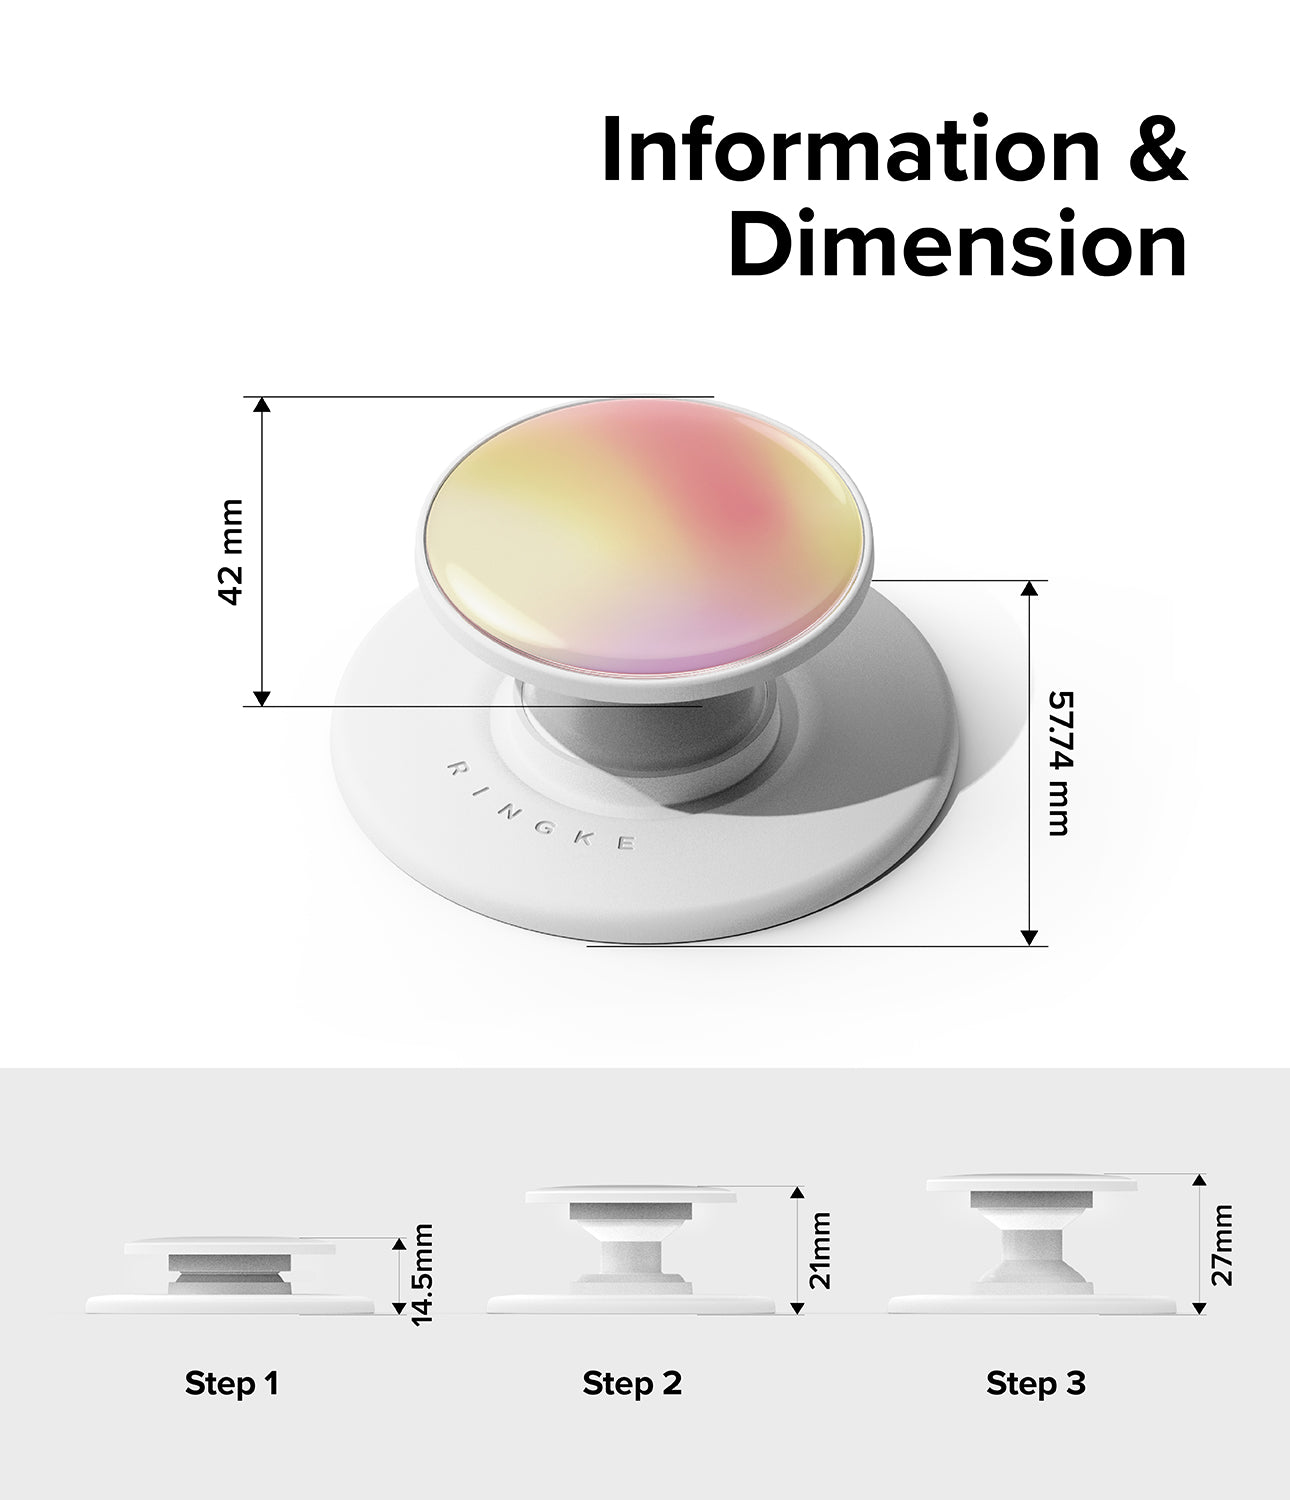 Ringke Glossy Tok Magnetic - Information and Dimension